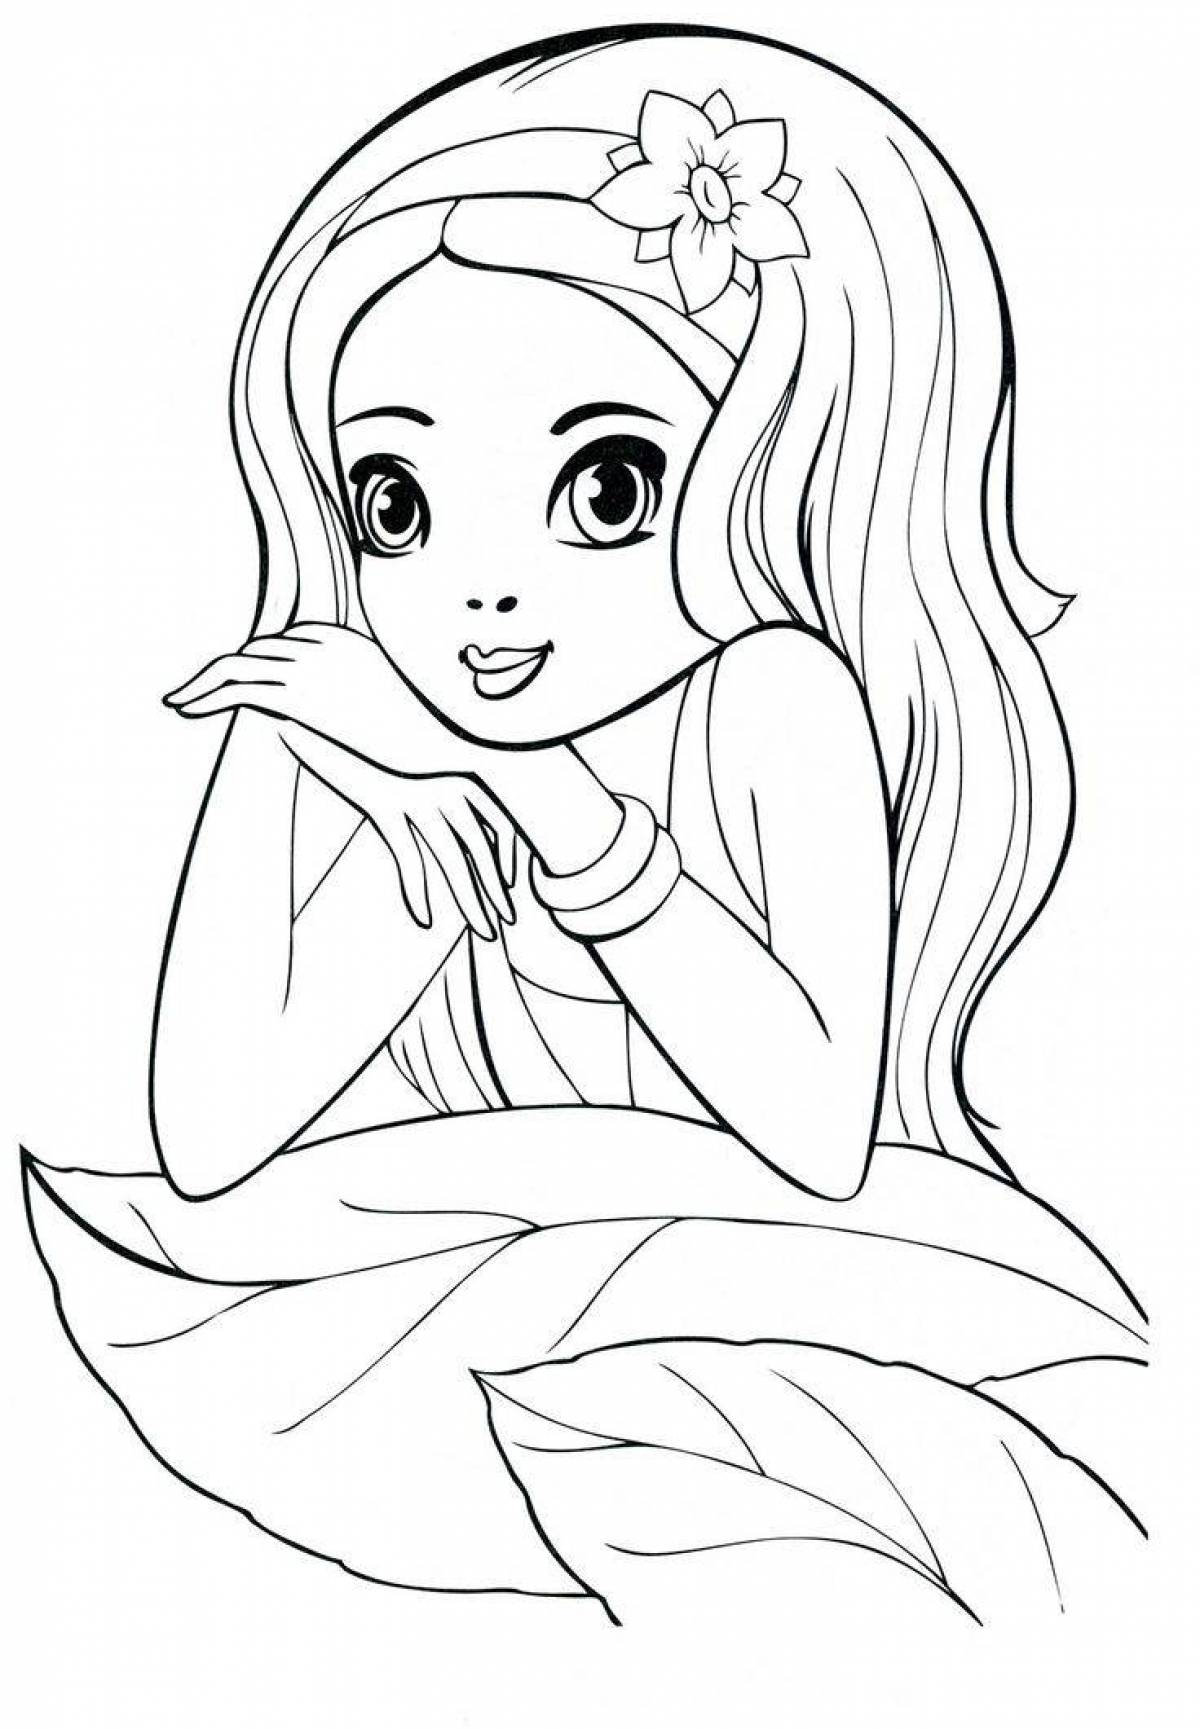 Spicy girls coloring pages